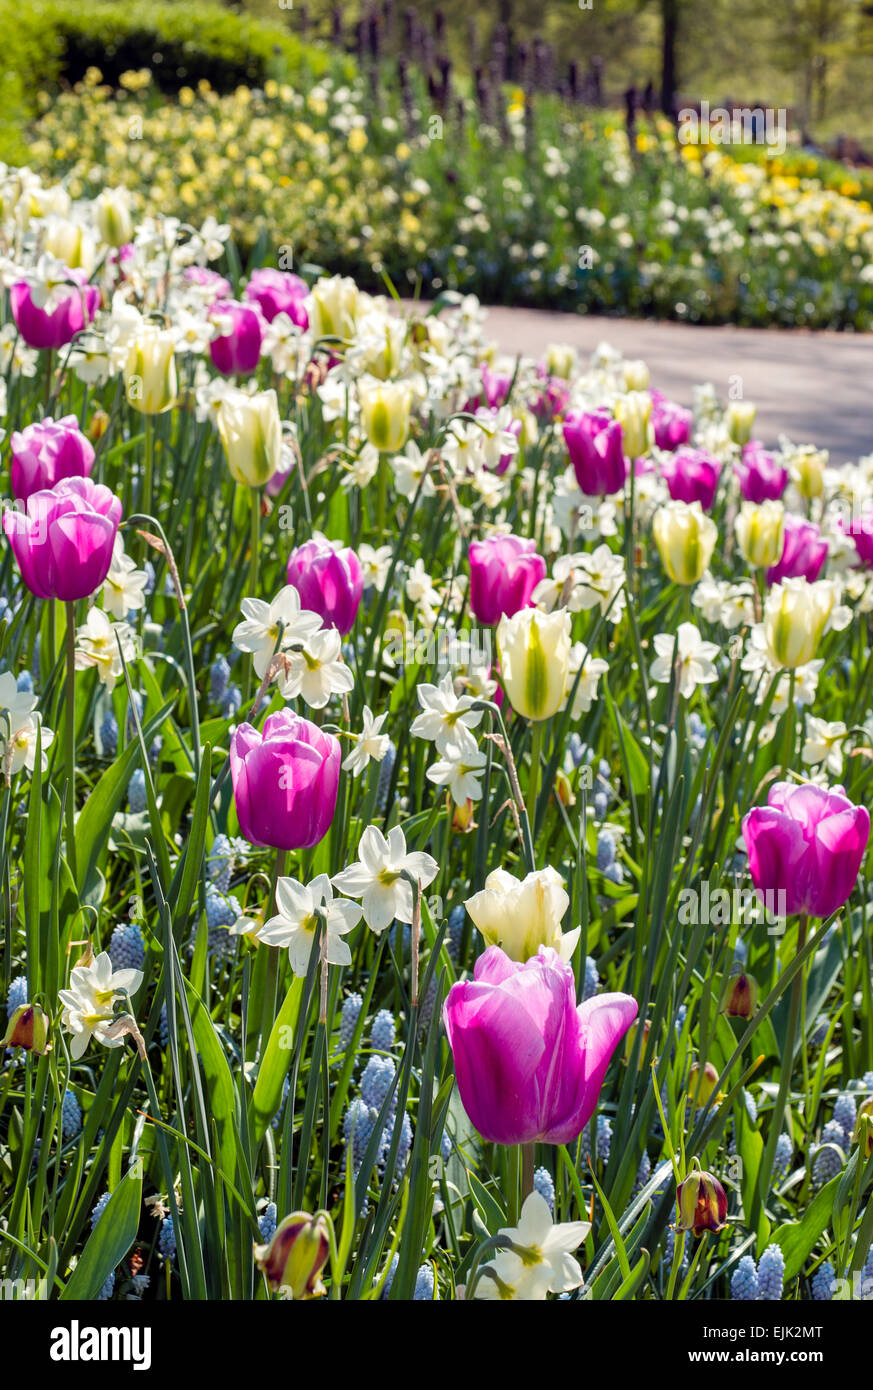 Spring flower bed with pink, magenta and white tulips (Tulipa) and white narcissus in a park Stock Photo